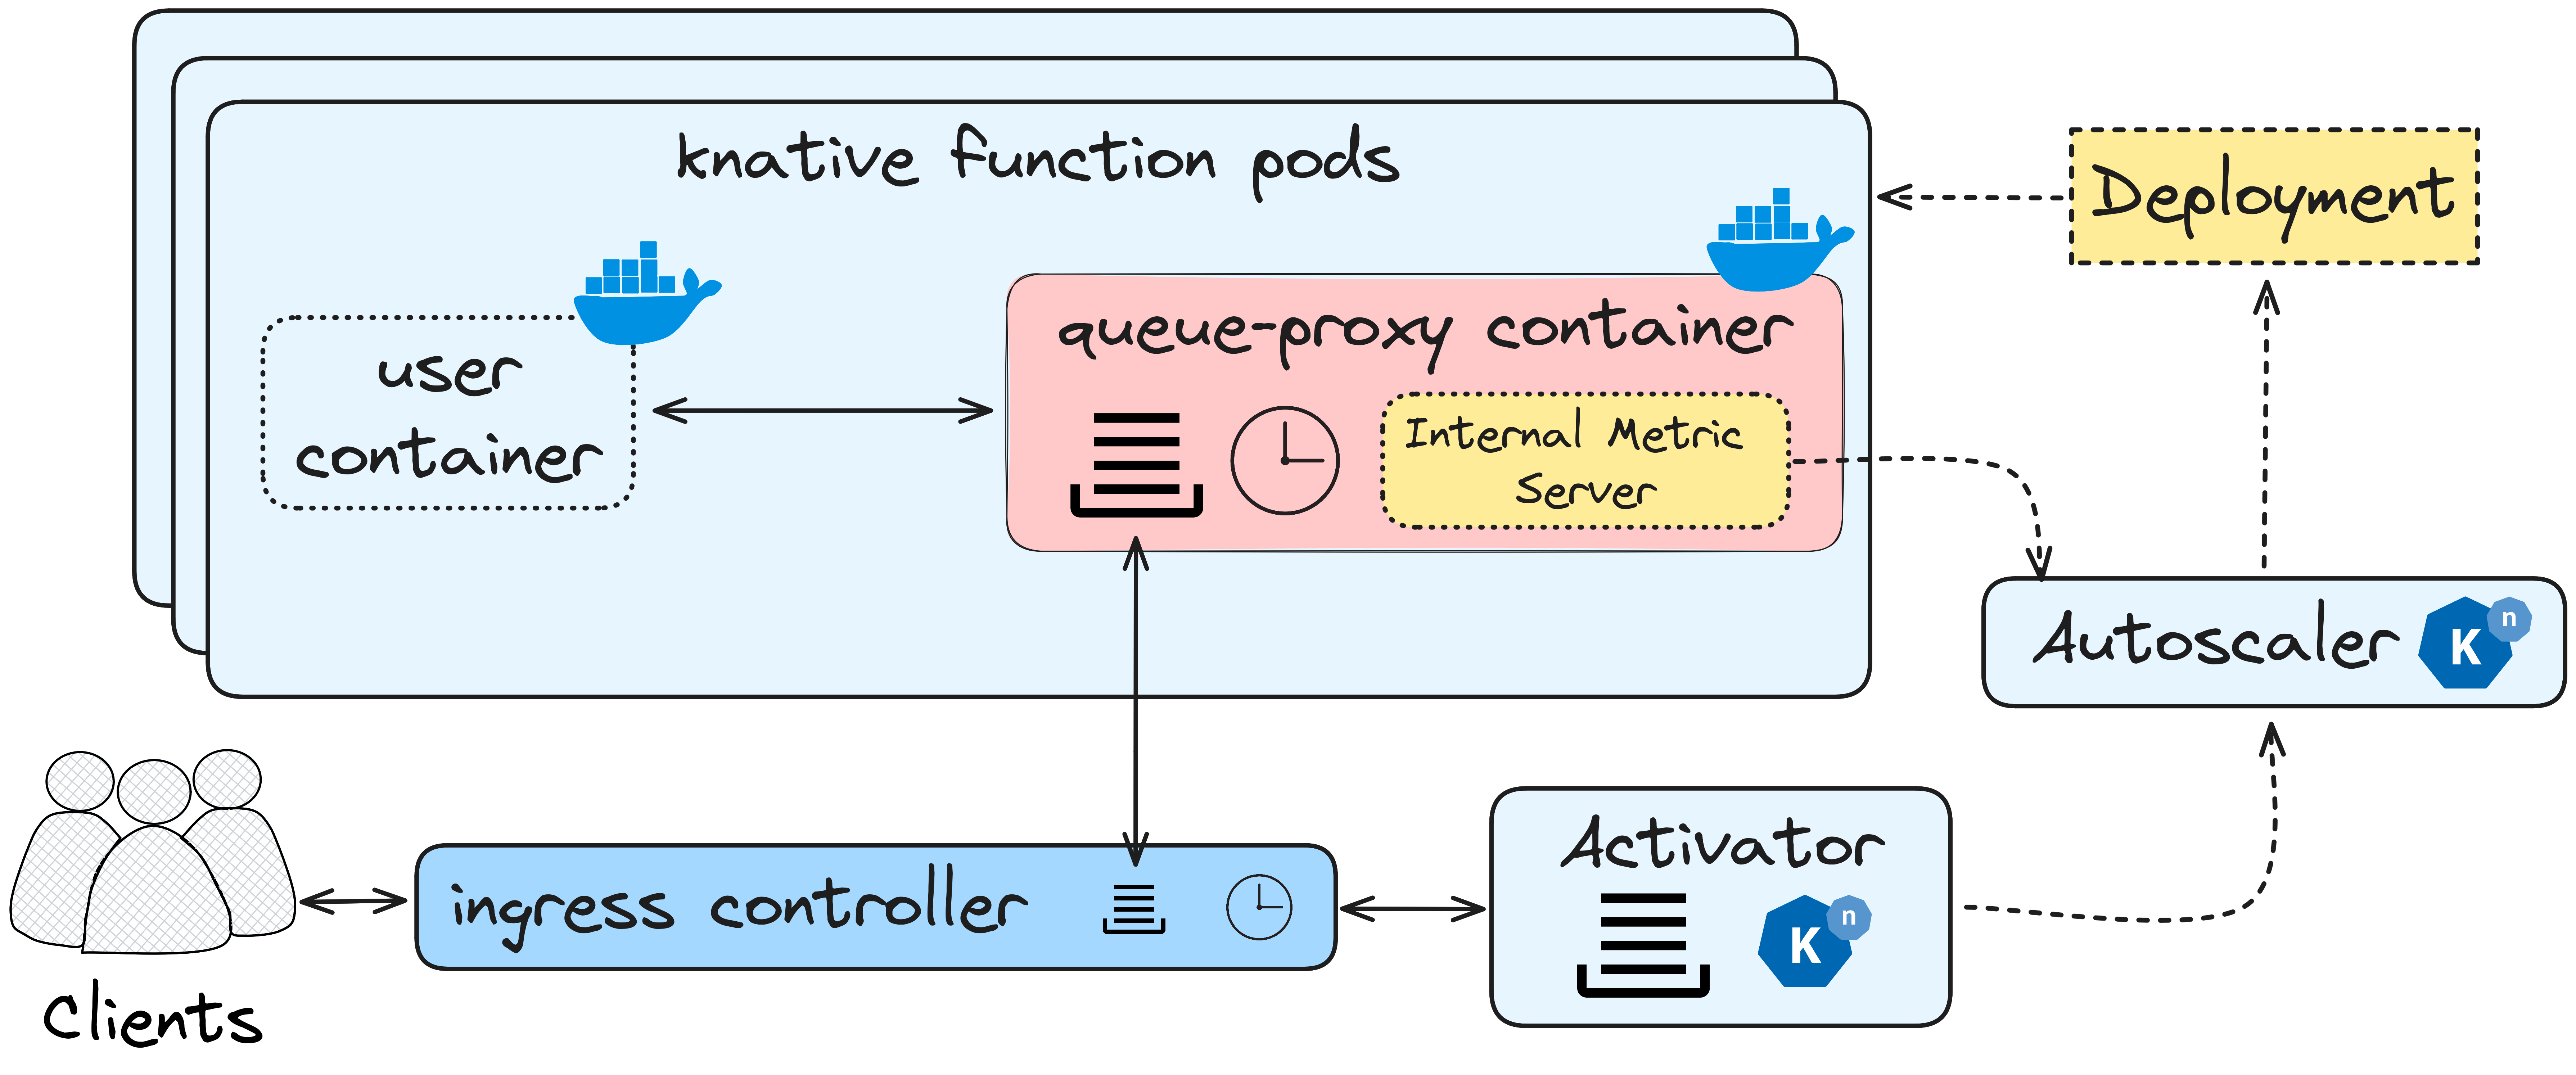 Figure 1: Knative Serving stock components and workflow.